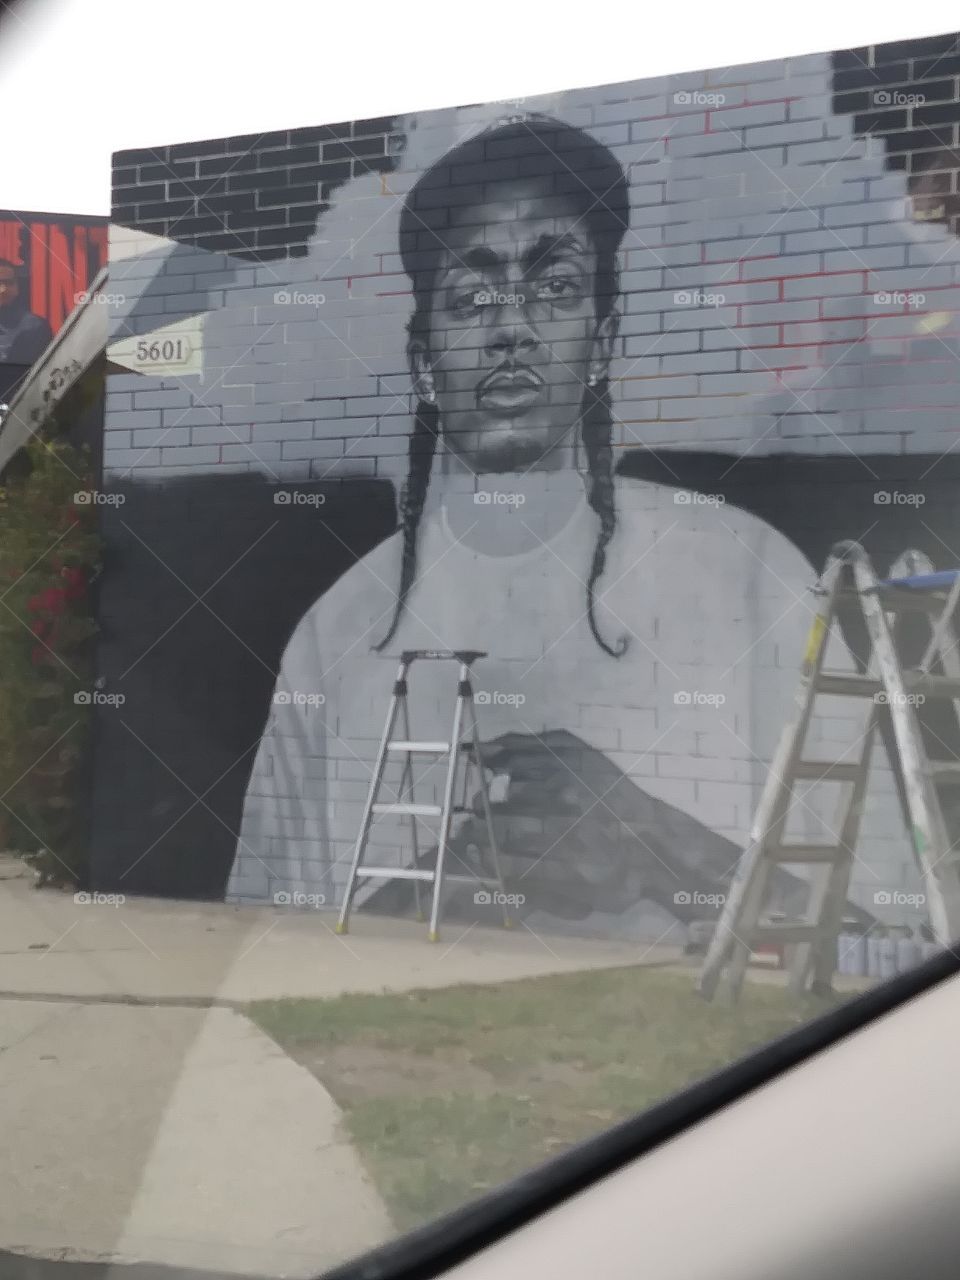 Mural of the late Nipsey Hussle